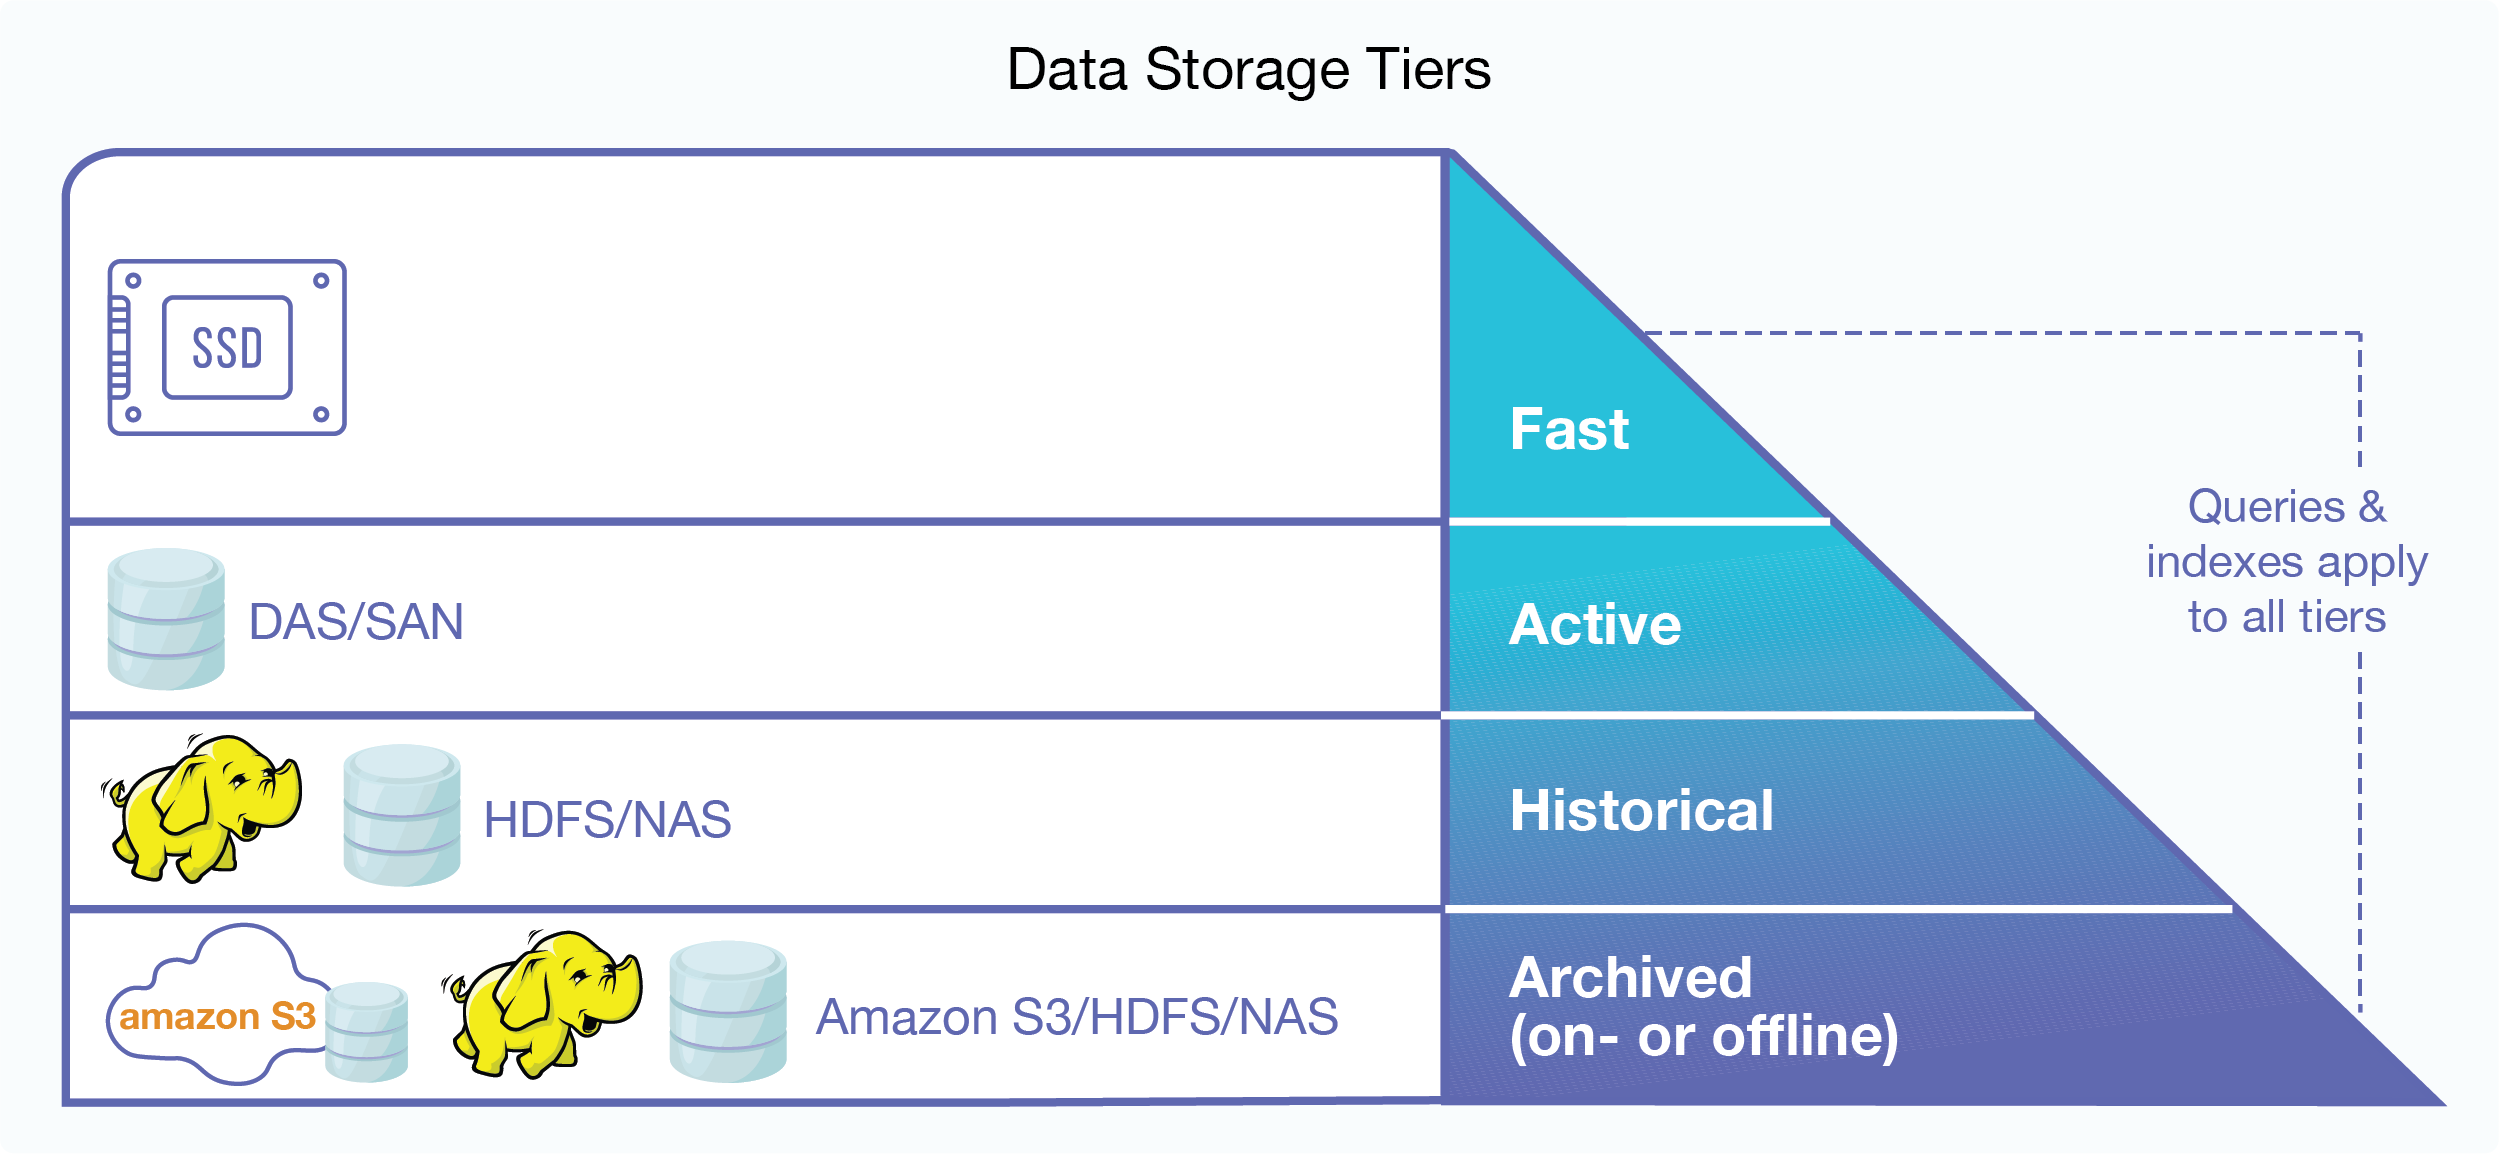 Graphic showing how data can be tiered in different storage devices in a pyramid-like manner